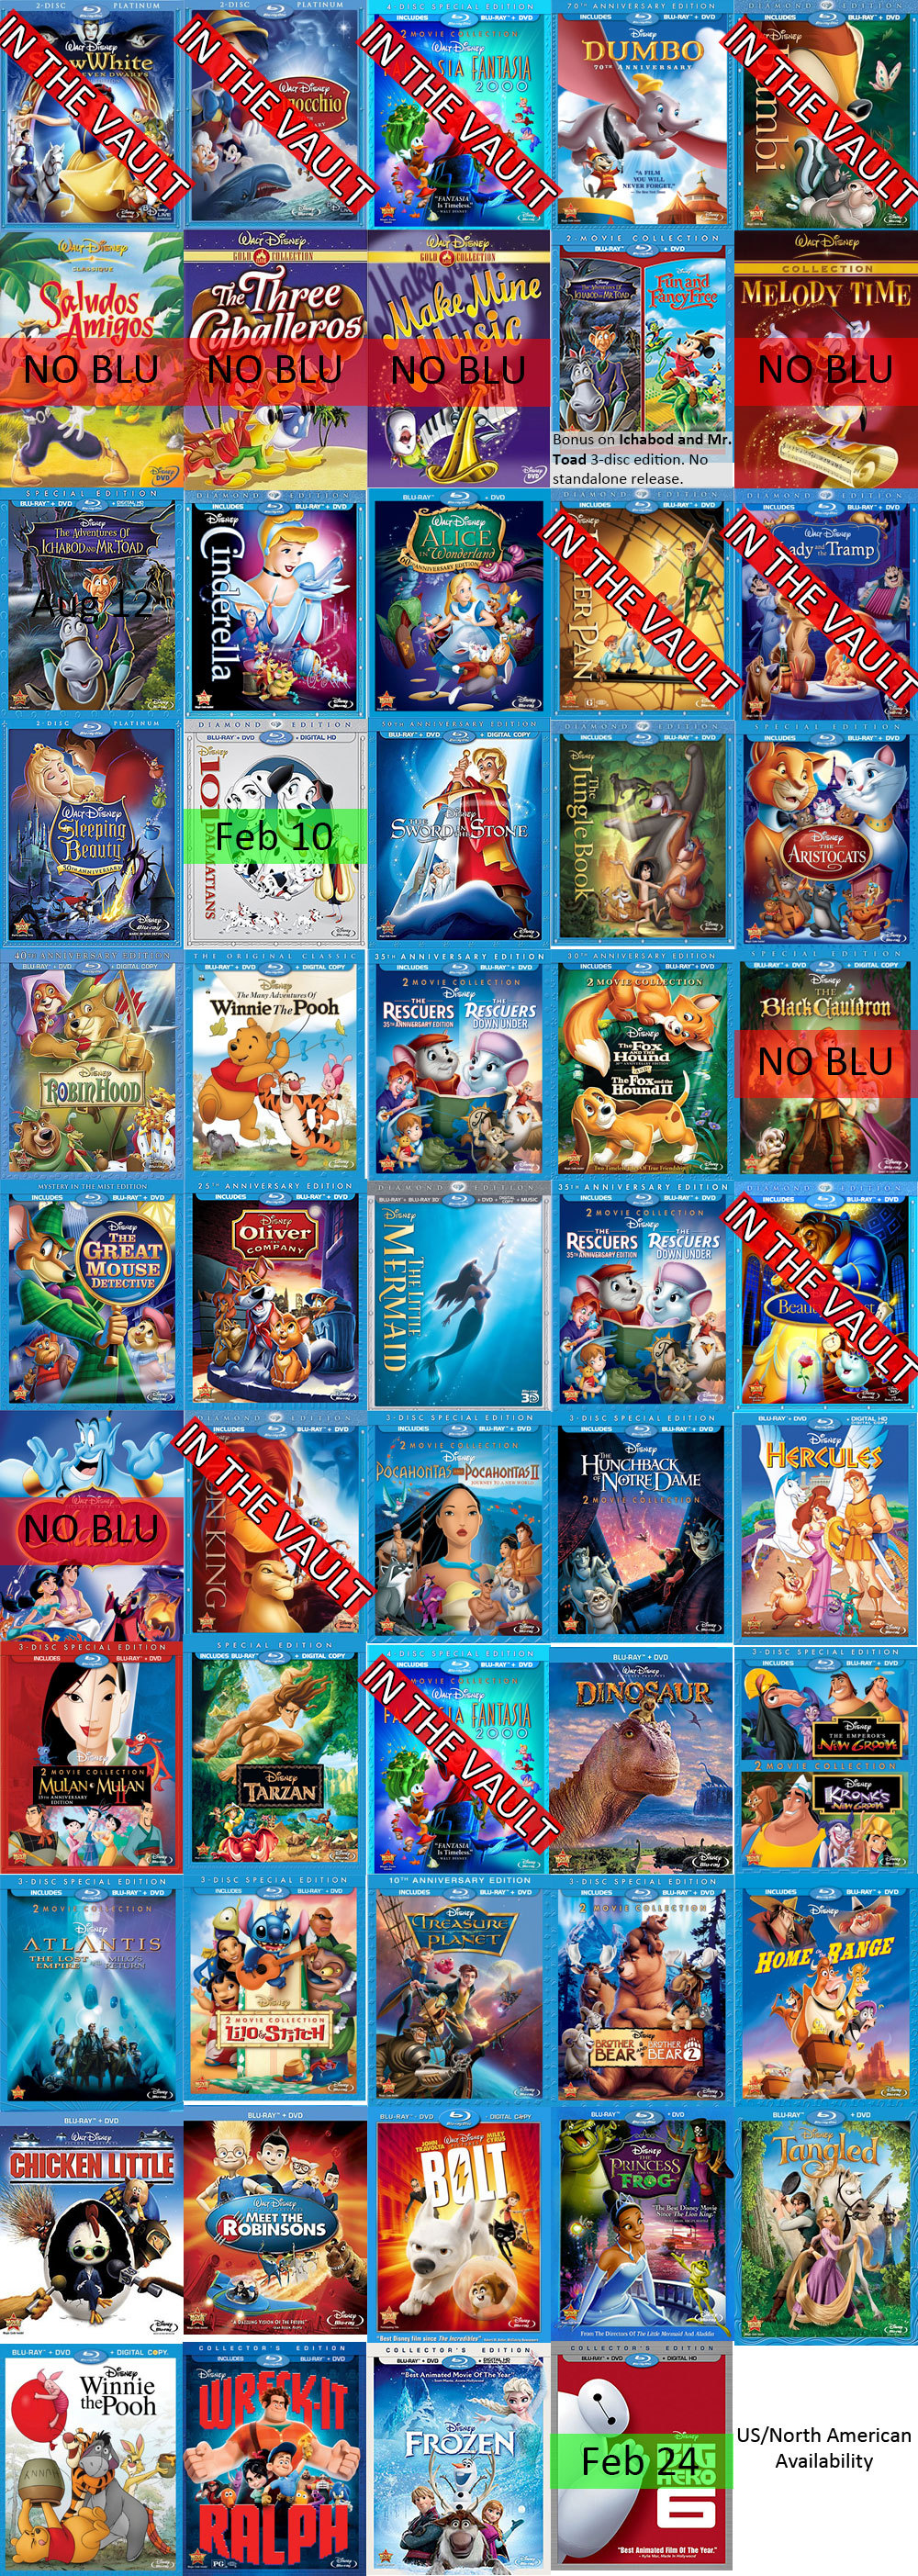 The Disney Blu-ray Thread: How I Learned to Stop Worrying and Love the ...